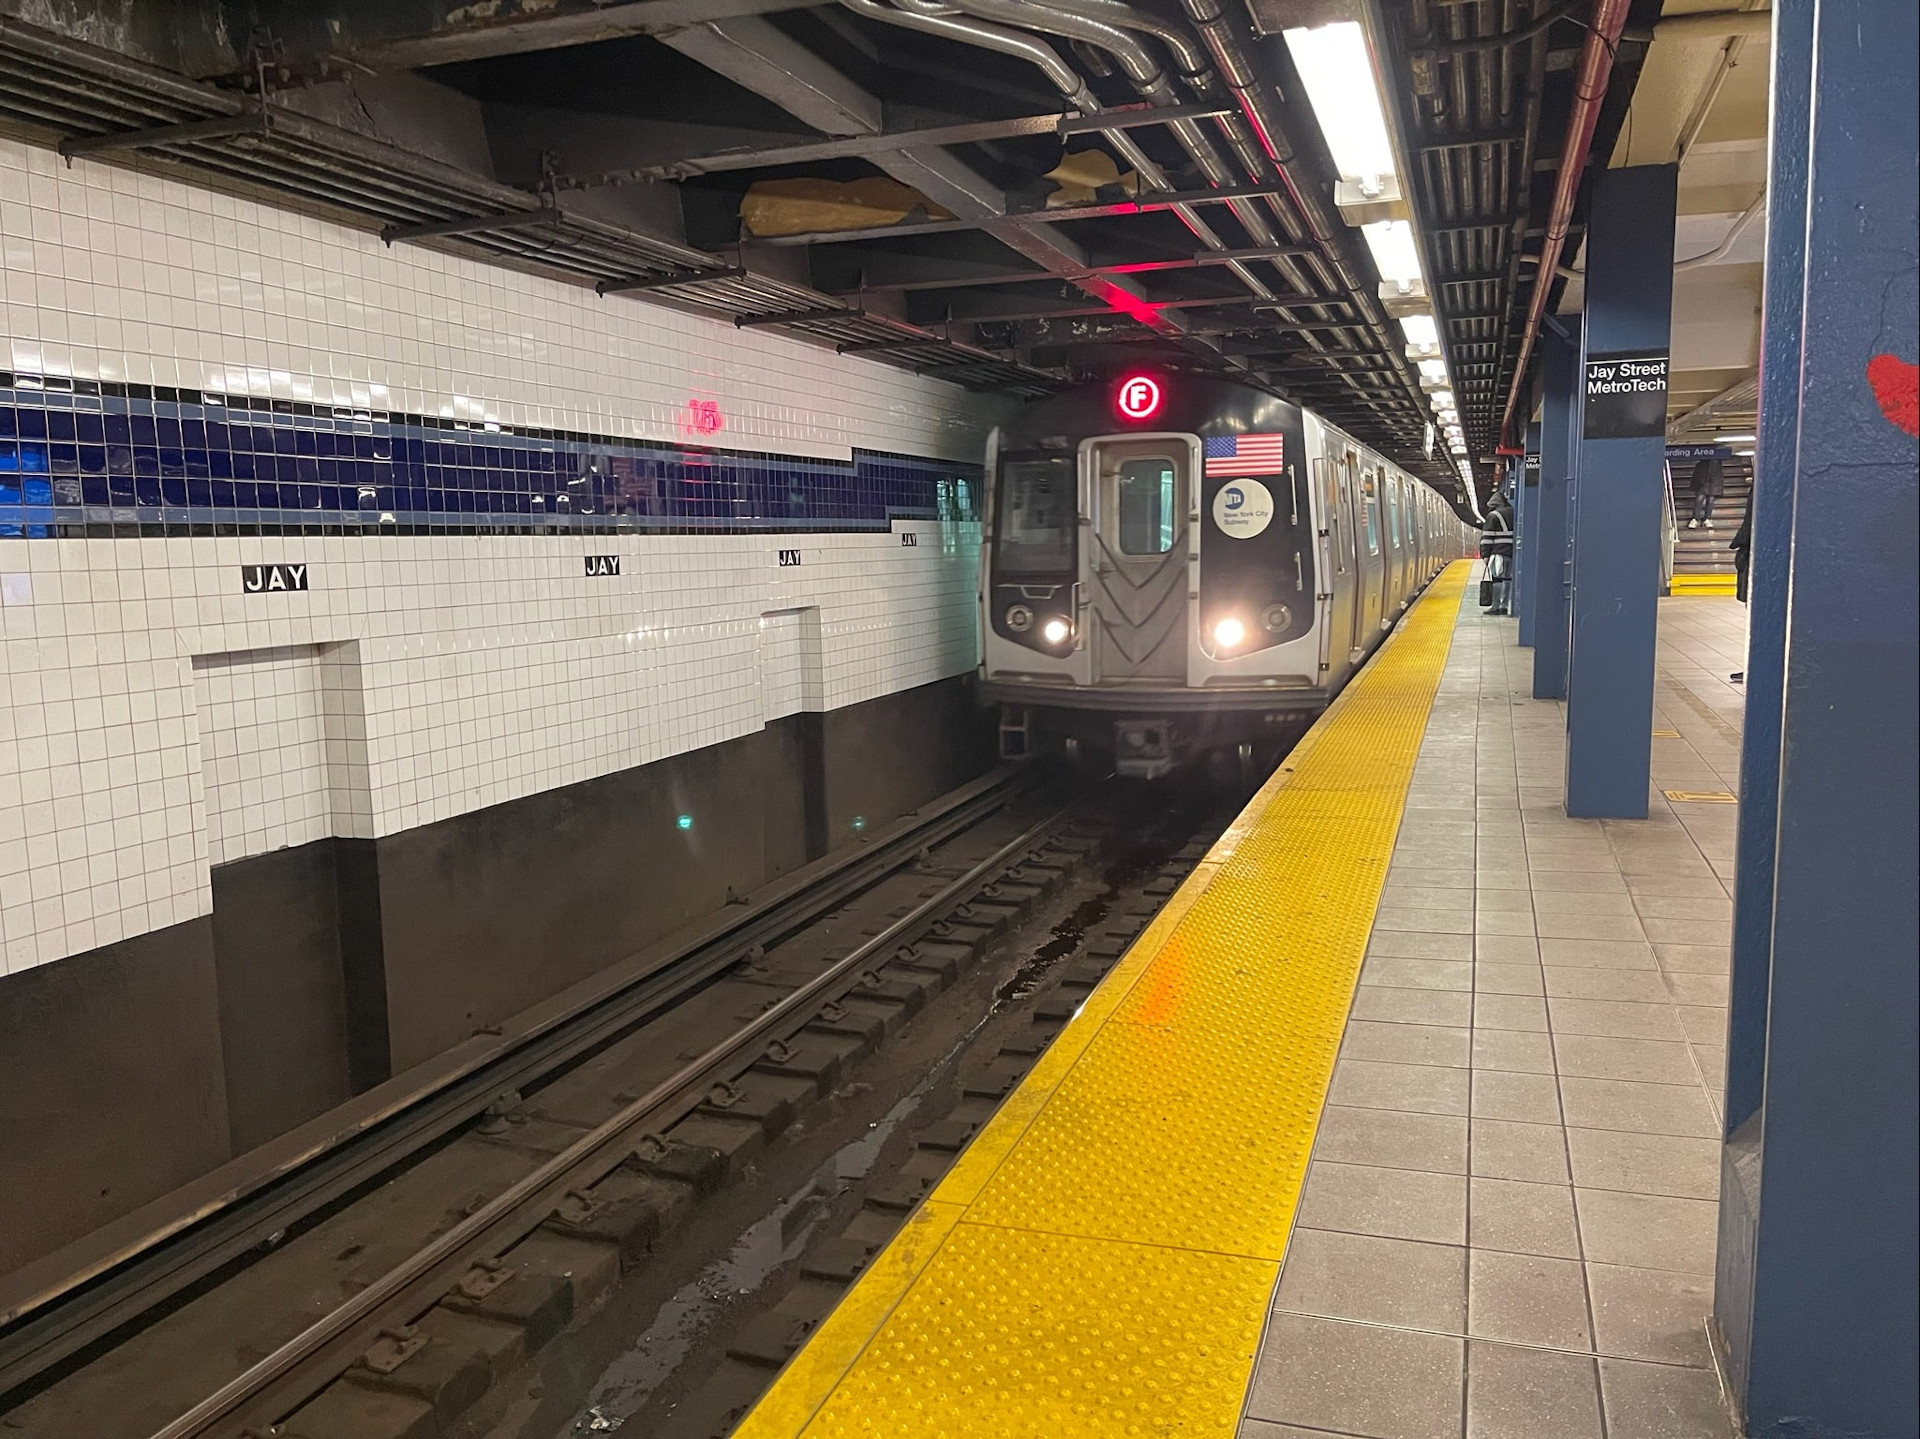 A train arriving at the JaySt-MetroTech subway station in New York City where tests are currently being held to foster inclusive mobility